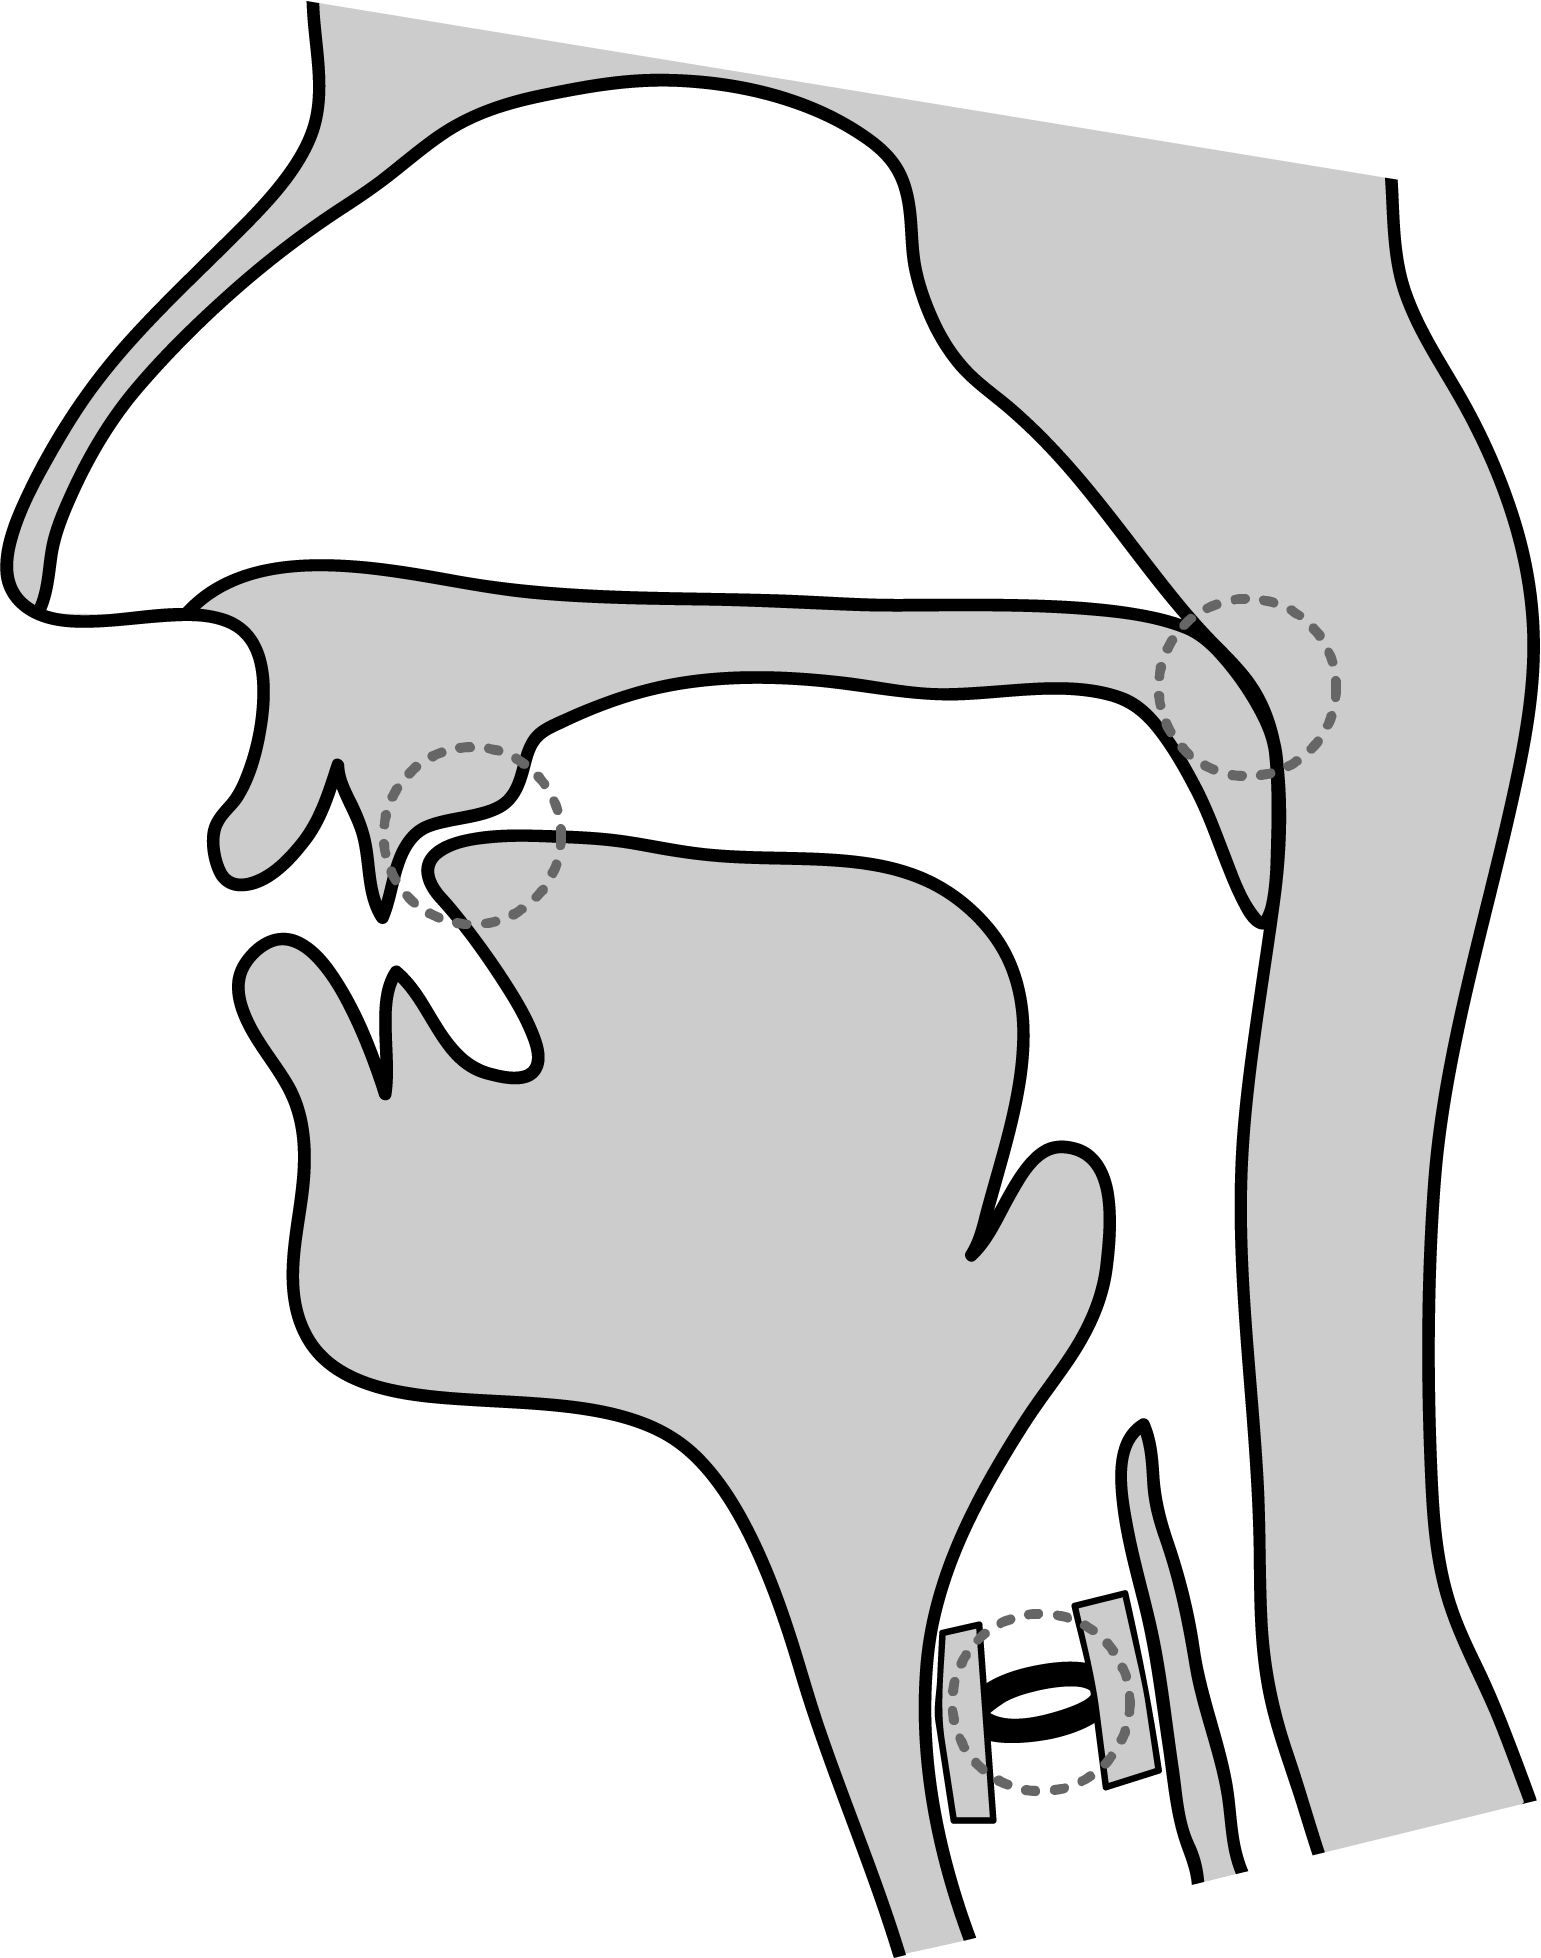 Midsagittal diagram showing the tongue front near the the alveolar ridge, the velum raised, and the vocal folds not vibrating.